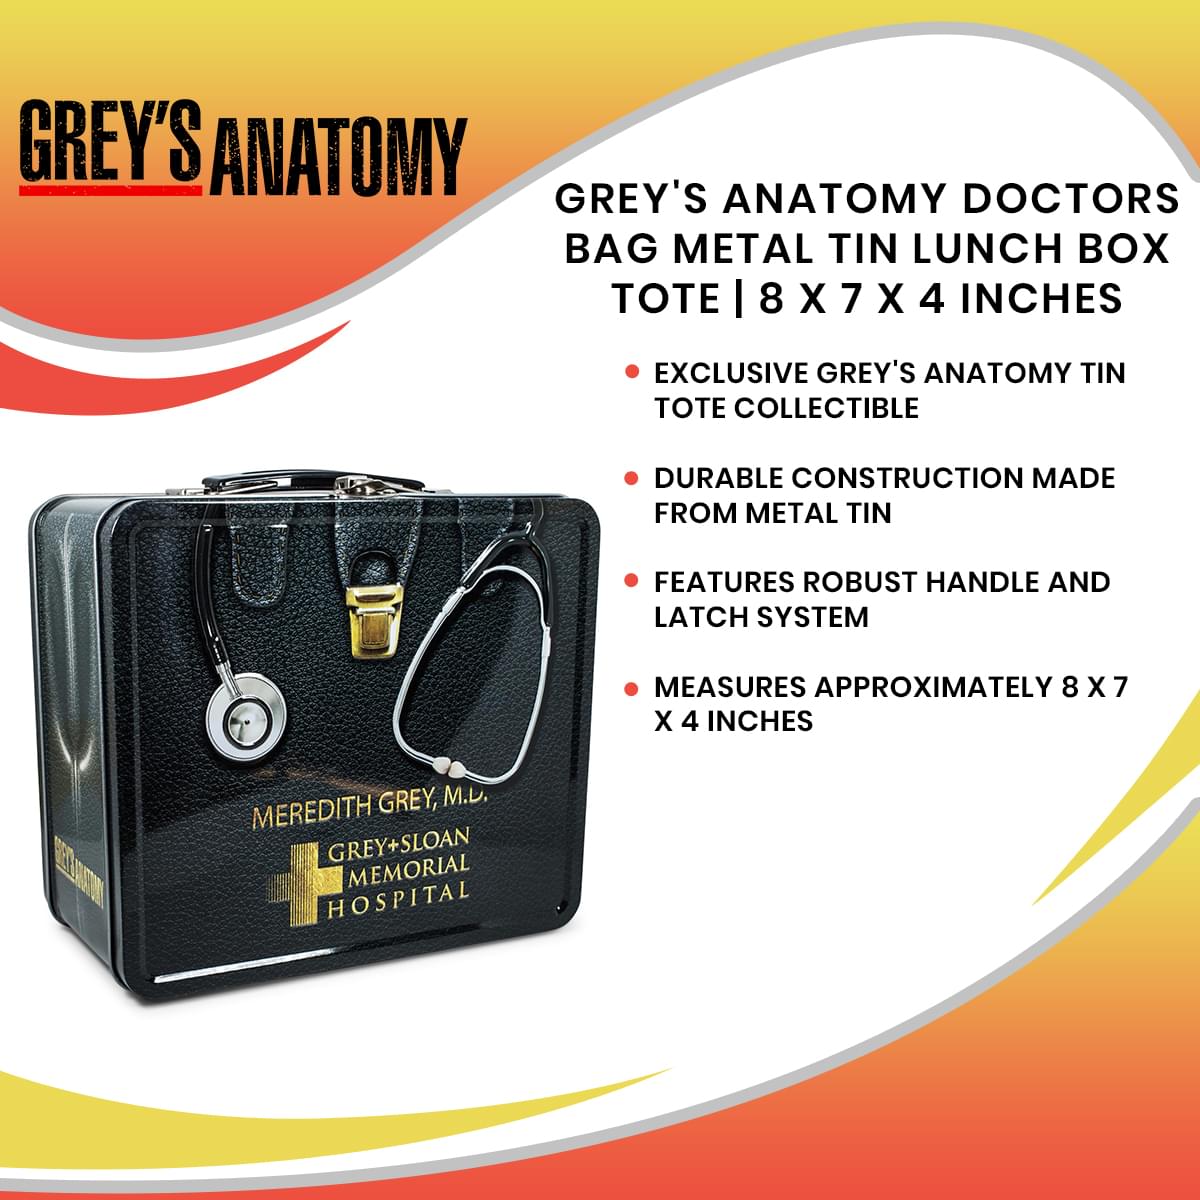 Grey's Anatomy Doctors Bag Metal Tin Lunch Box Tote | 8 x 7 x 4 Inches